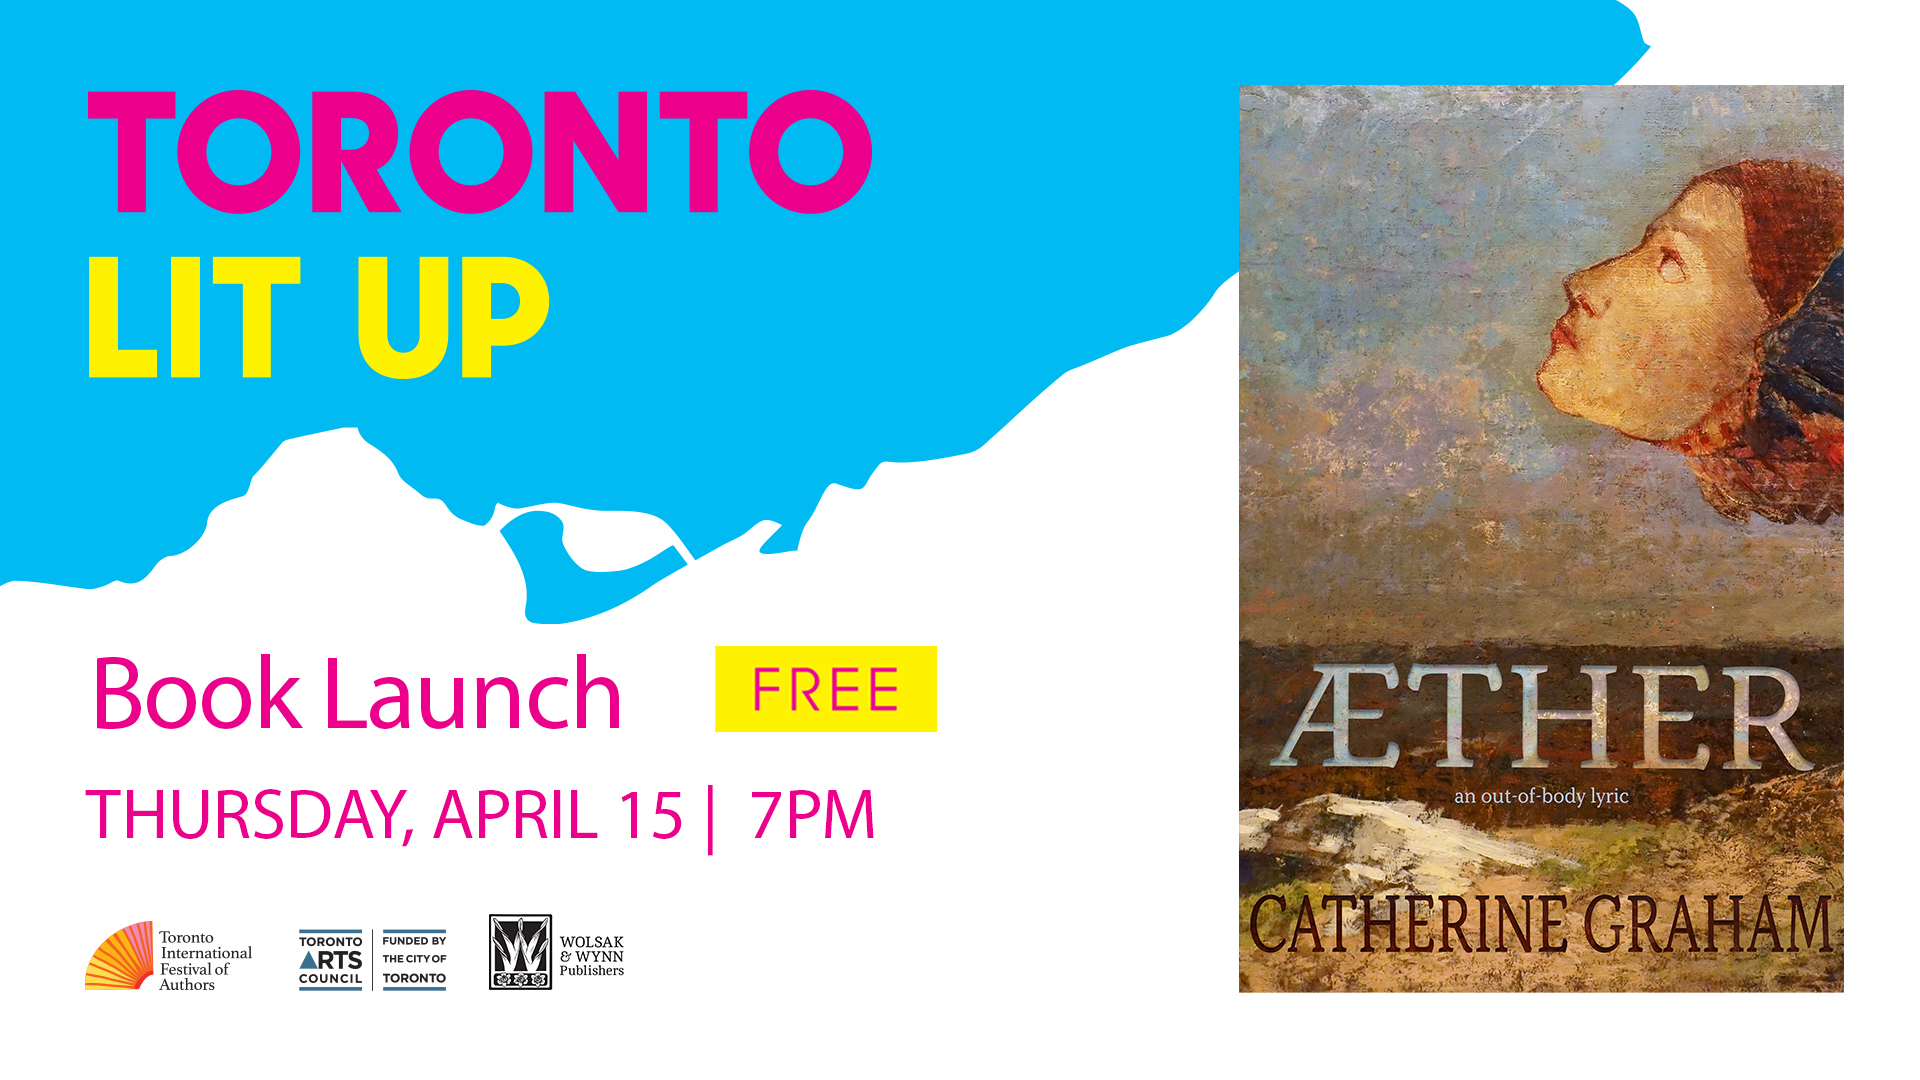 Catherine Graham Toronto Lit Up banner with the book cover of AETHER and "Book Launch Free Thursday April 15 7pm". Includes TIFA, Toronto Arts Council and Wolsak and Wynn logos